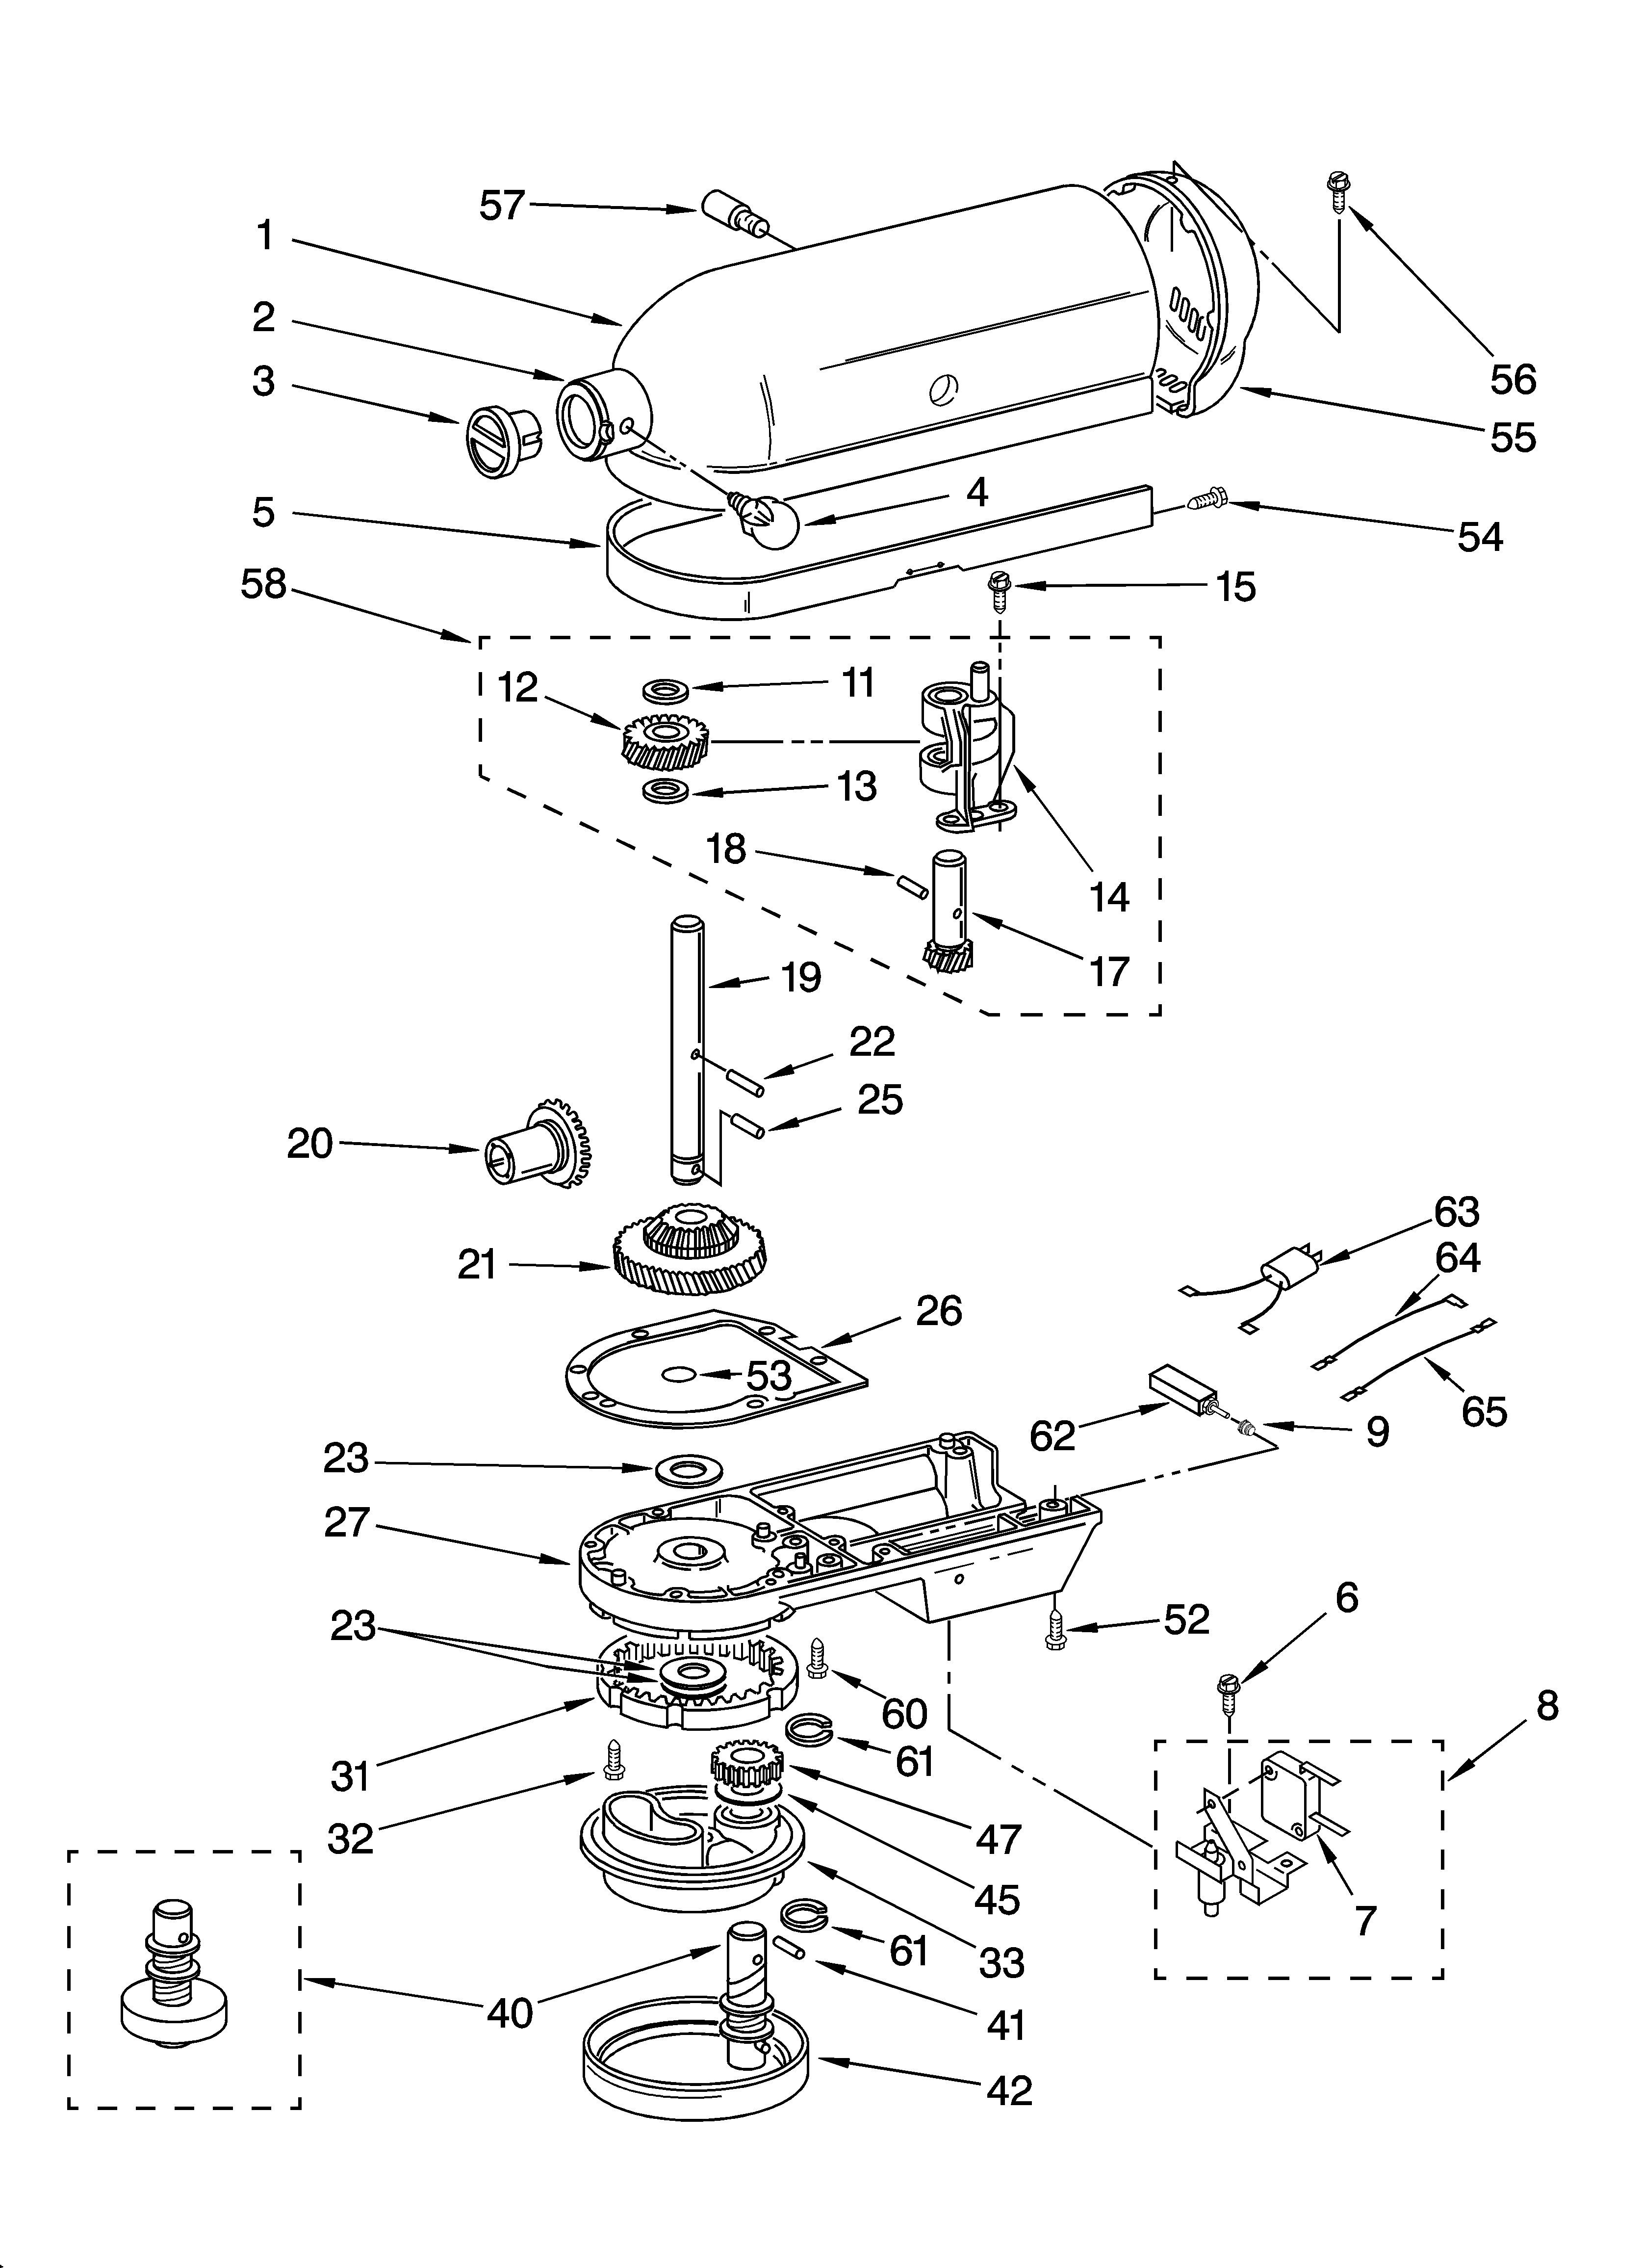 https://www.genuinereplacementparts.com/images/diagram/ksm5-case-gearing-and-planetary-unit.png